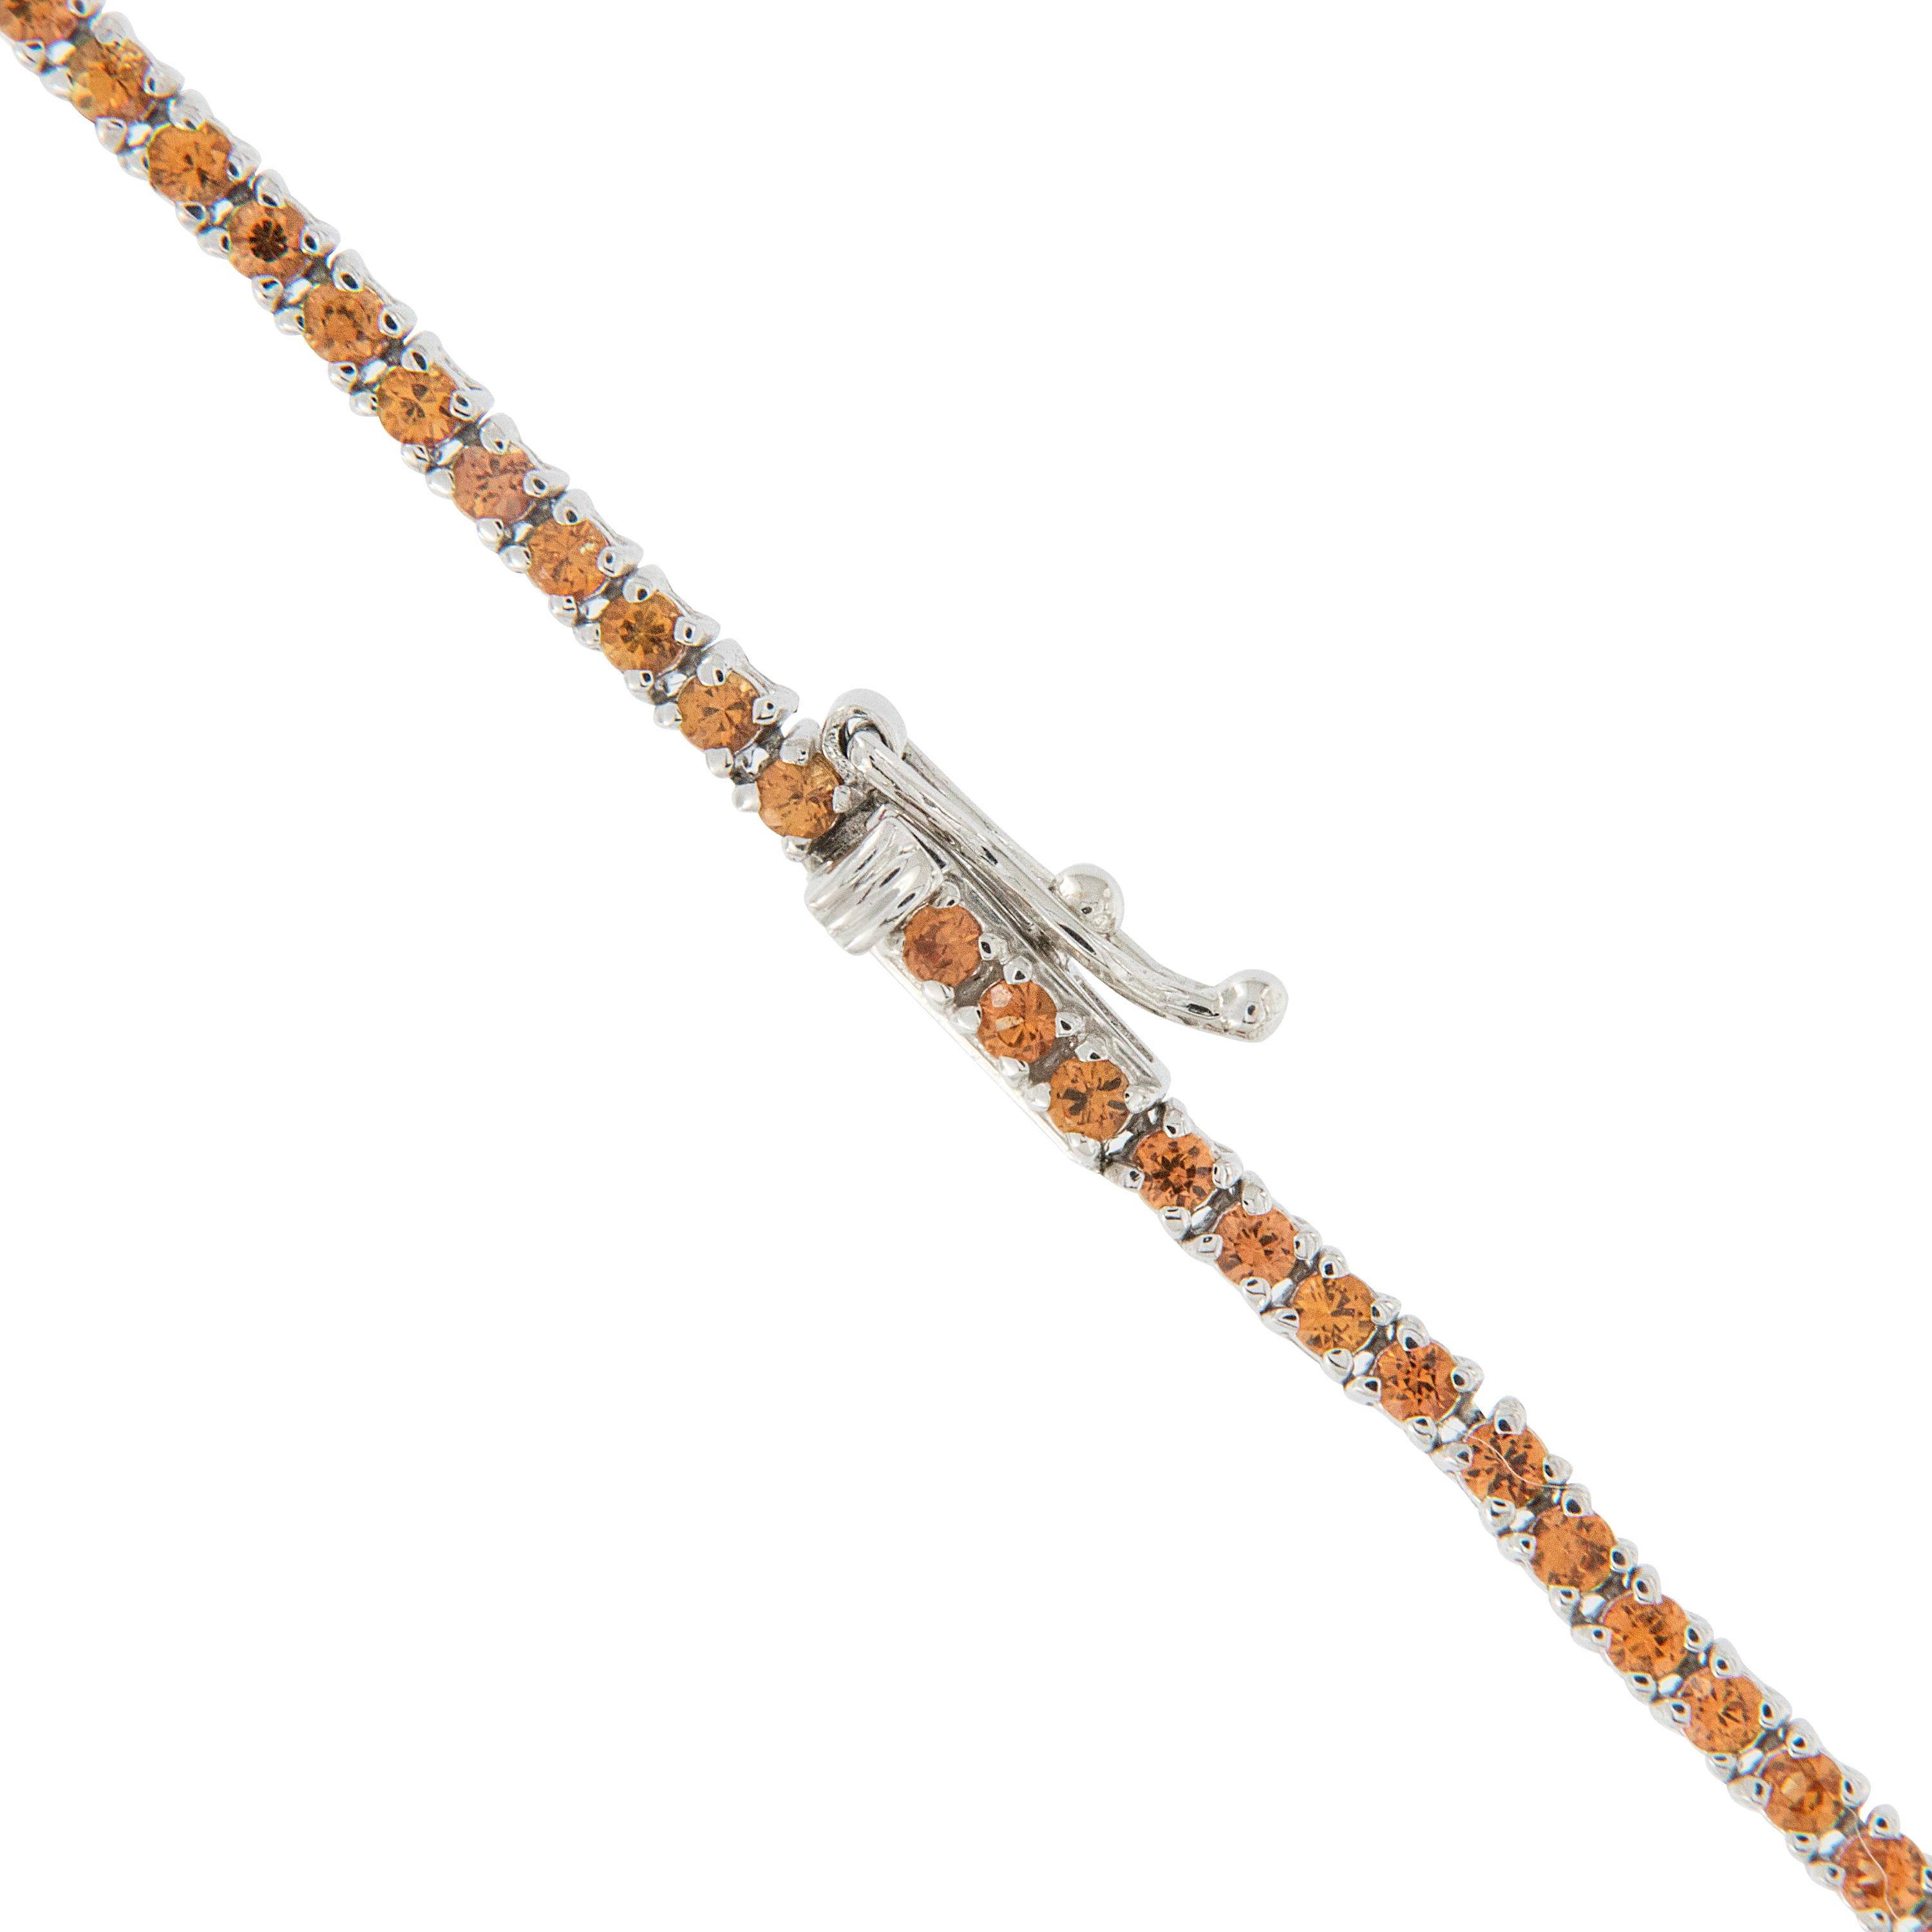 Sunny, warm hues of rare Golden South Sea pearls & orange sapphires bring to mind the weather of the tropical regions they come from. Two Gem Golden pearls (10-14mm) drop from the center in offset fashion with the orange sapphires (3.94 Cttw)